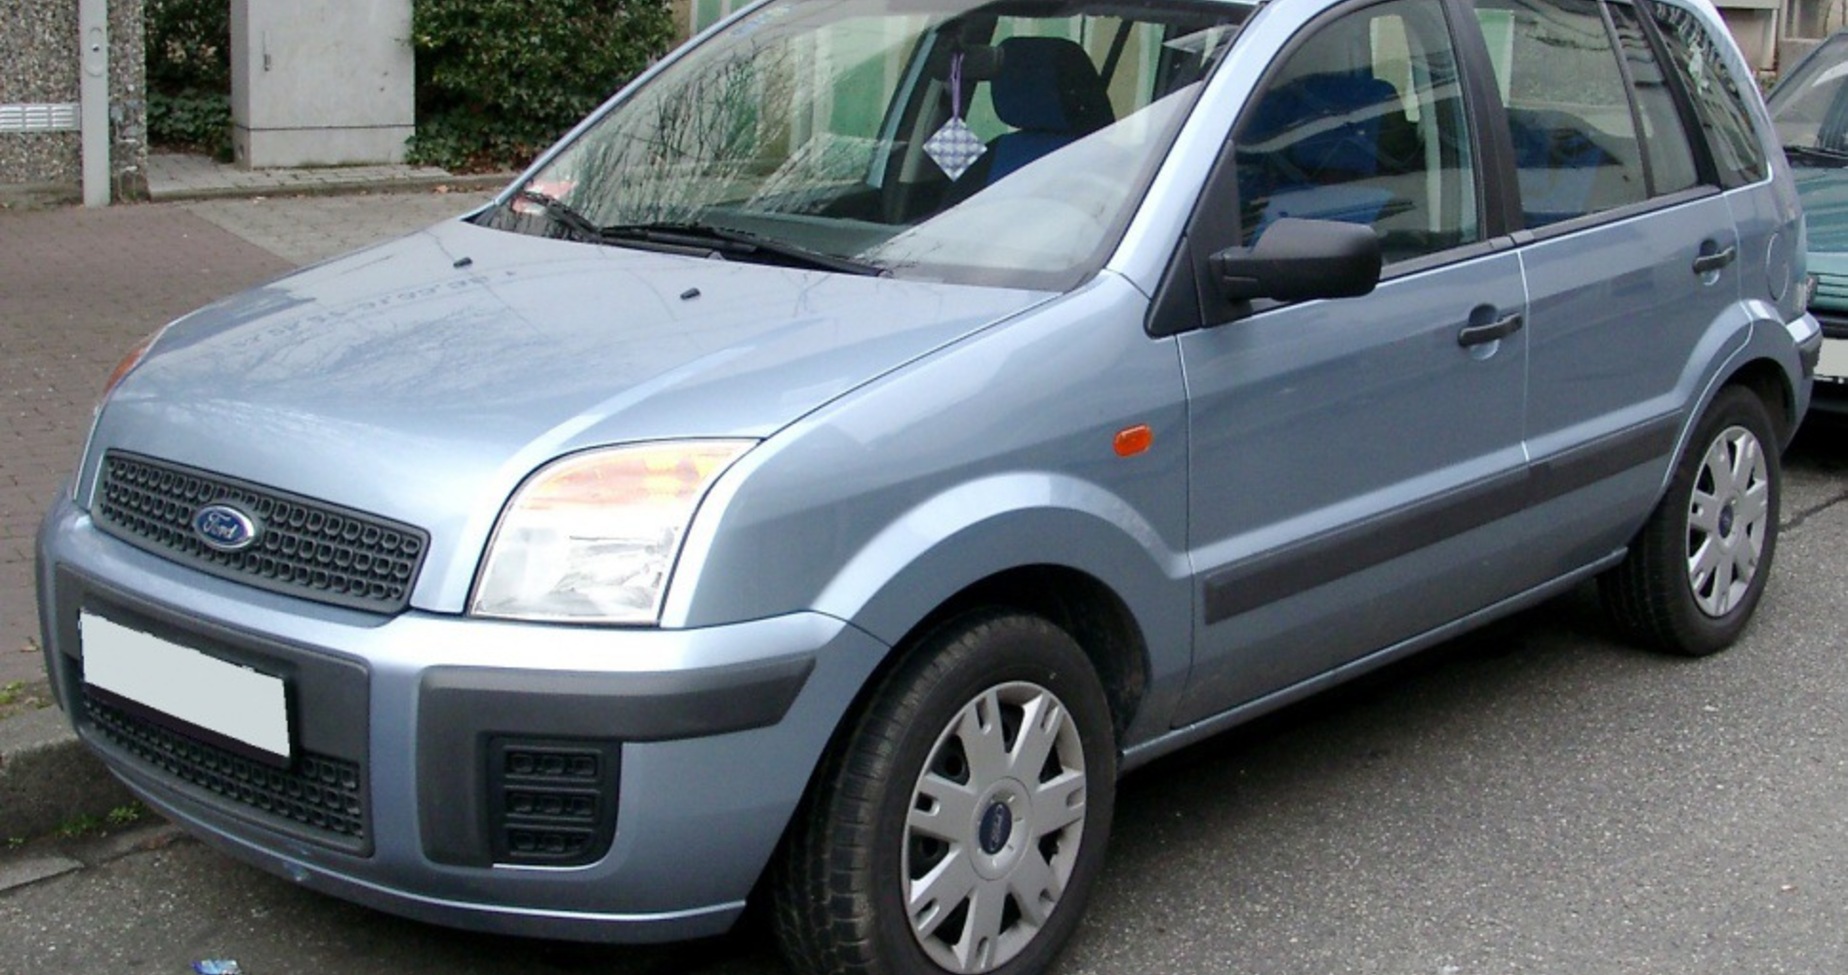 Ford Fusion I (facelift 2005) 1.4 TDCi (68 Hp) Automatic 2005, 2006, 2007, 2008, 2009, 2010, 2011, 2012 